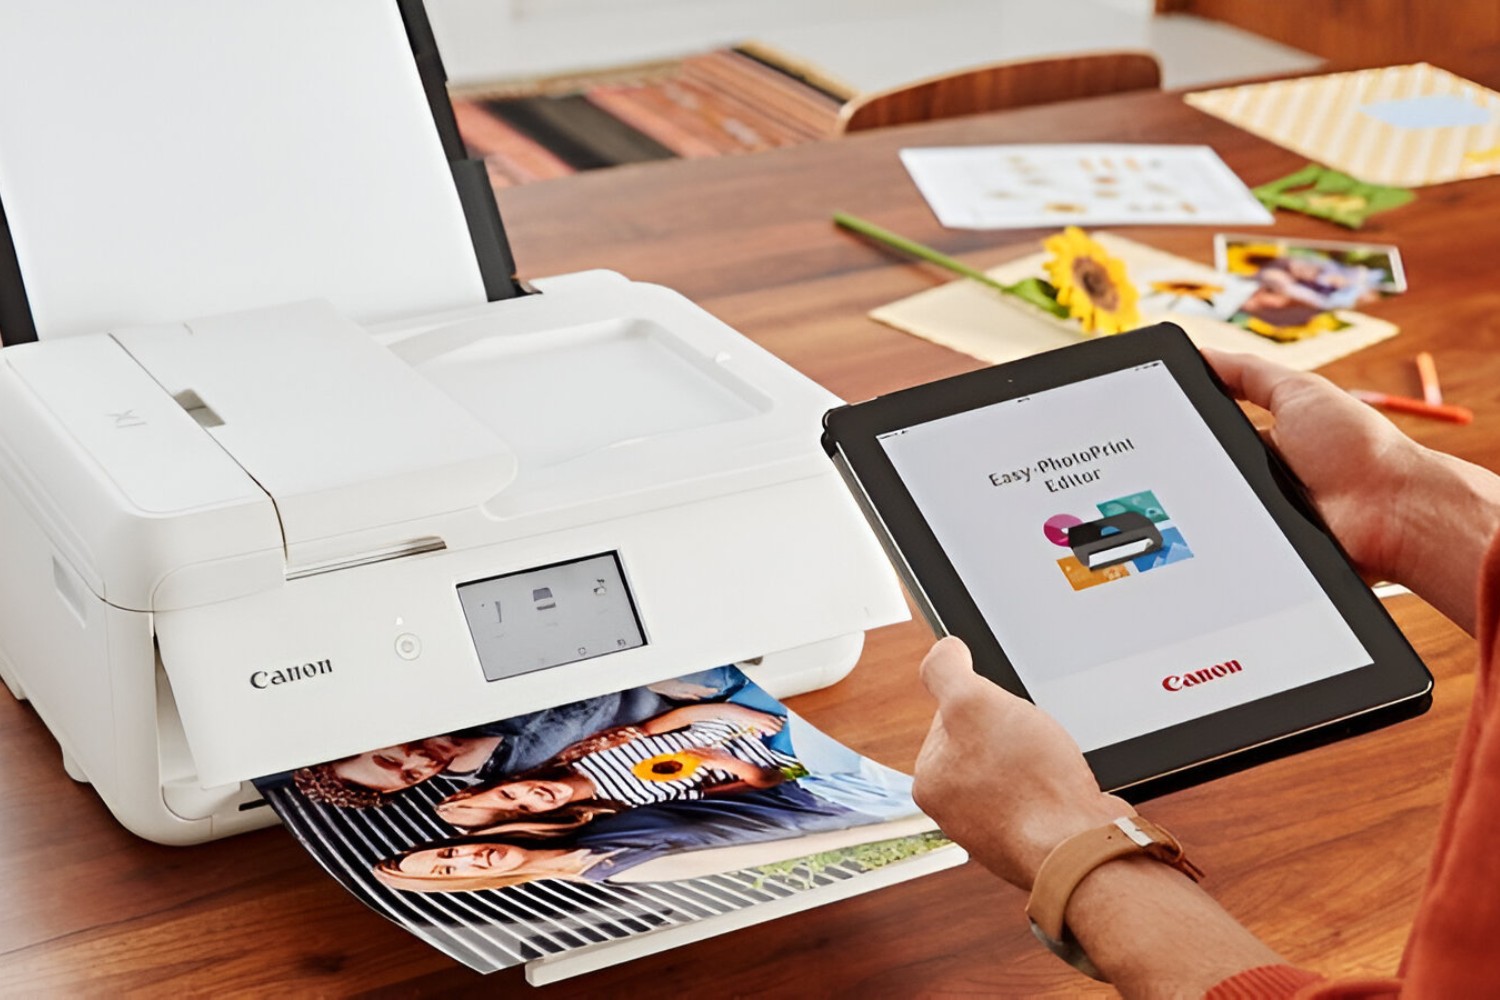 How To Print From Tablet To Wi-Fi Printer